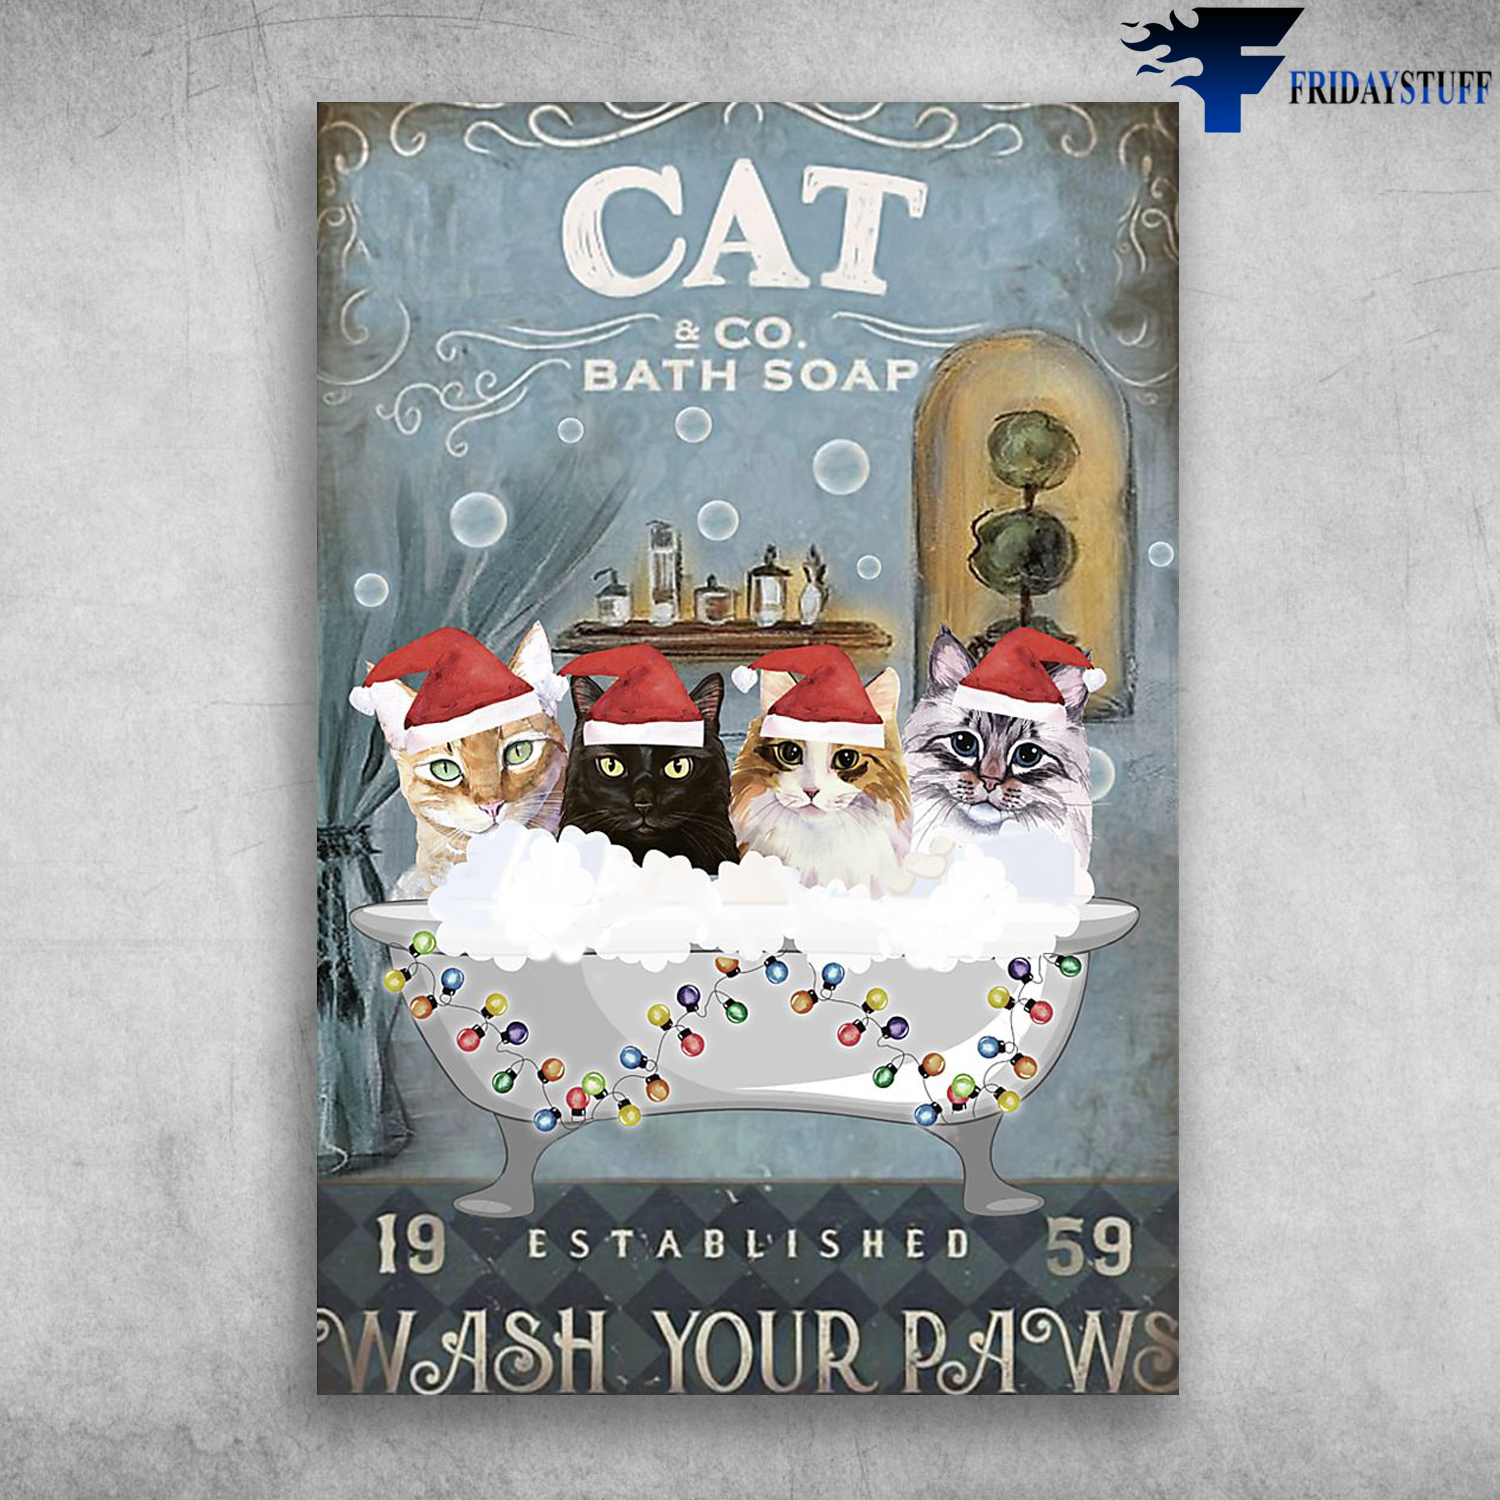 Merry Christmas Cat Bath Soap Established Wash Your Paws